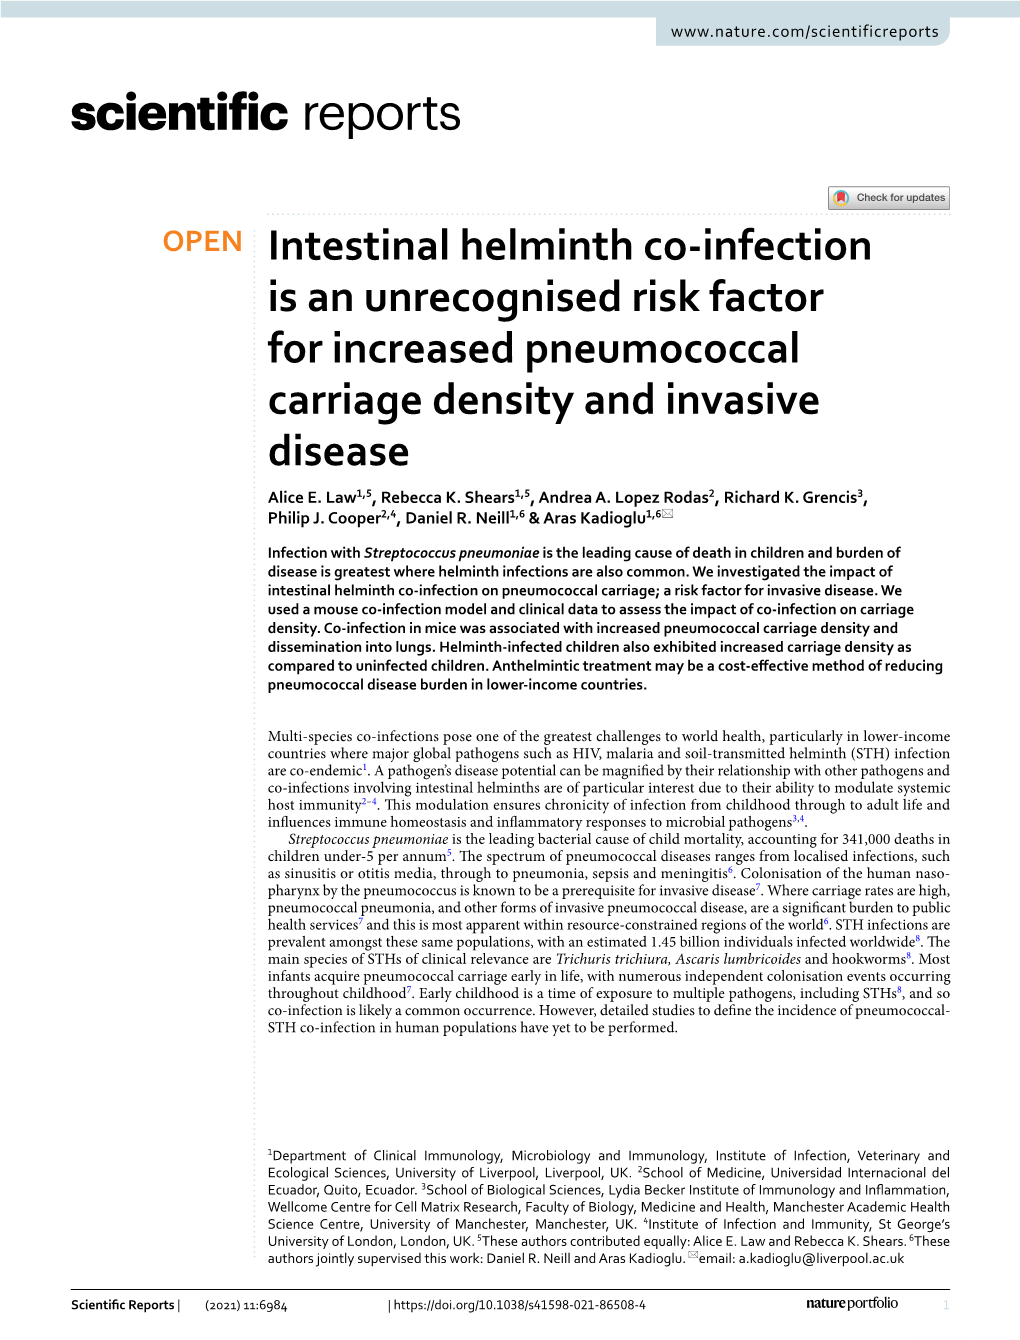 Intestinal Helminth Co-Infection Is an Unrecognised Risk Factor For